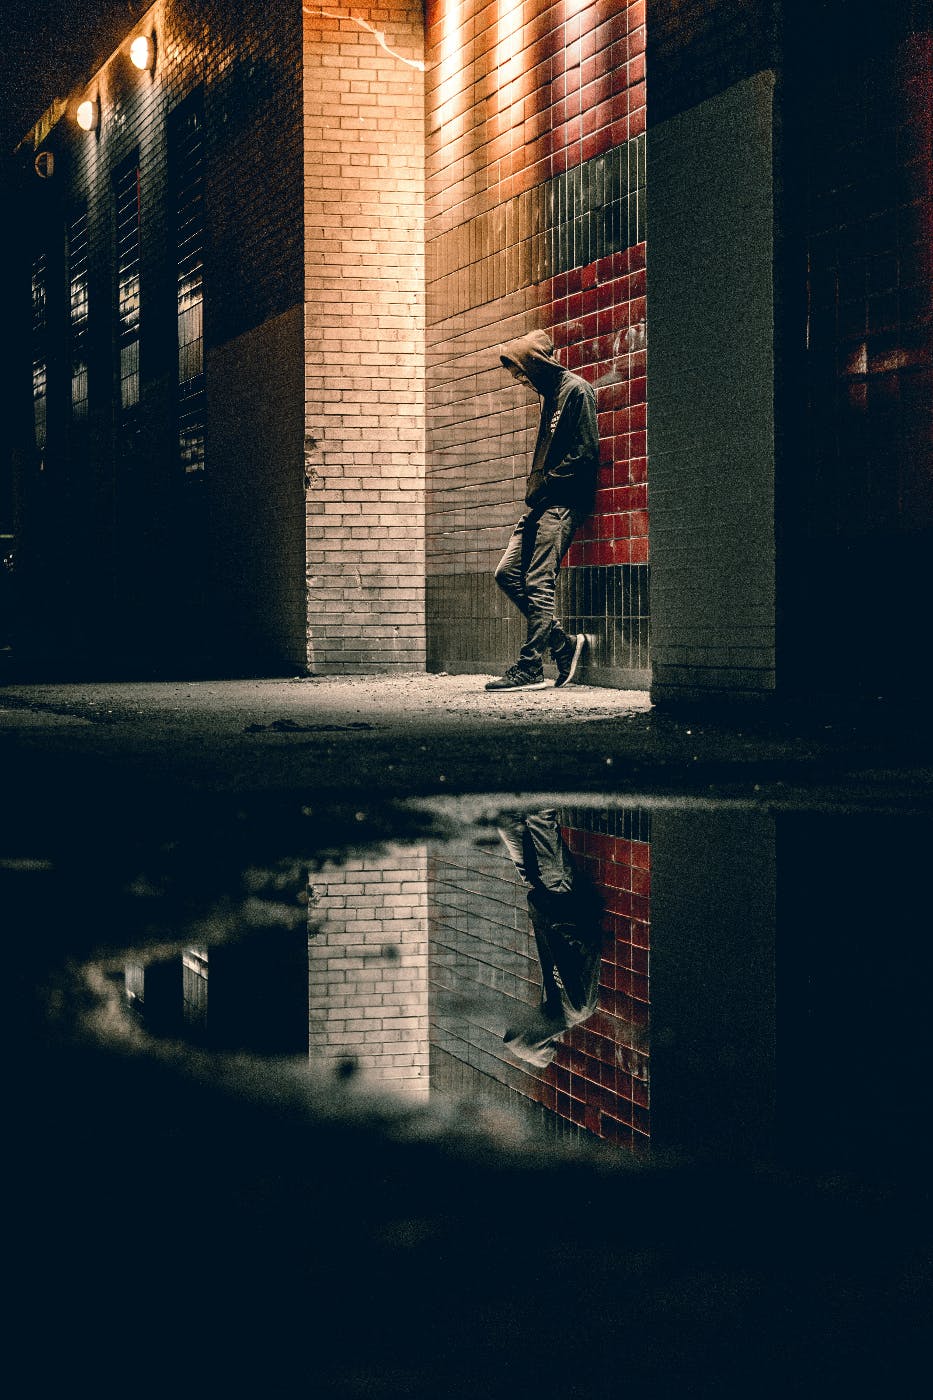 A man leaning against a red tile wall, night. he is reflected in a puddle